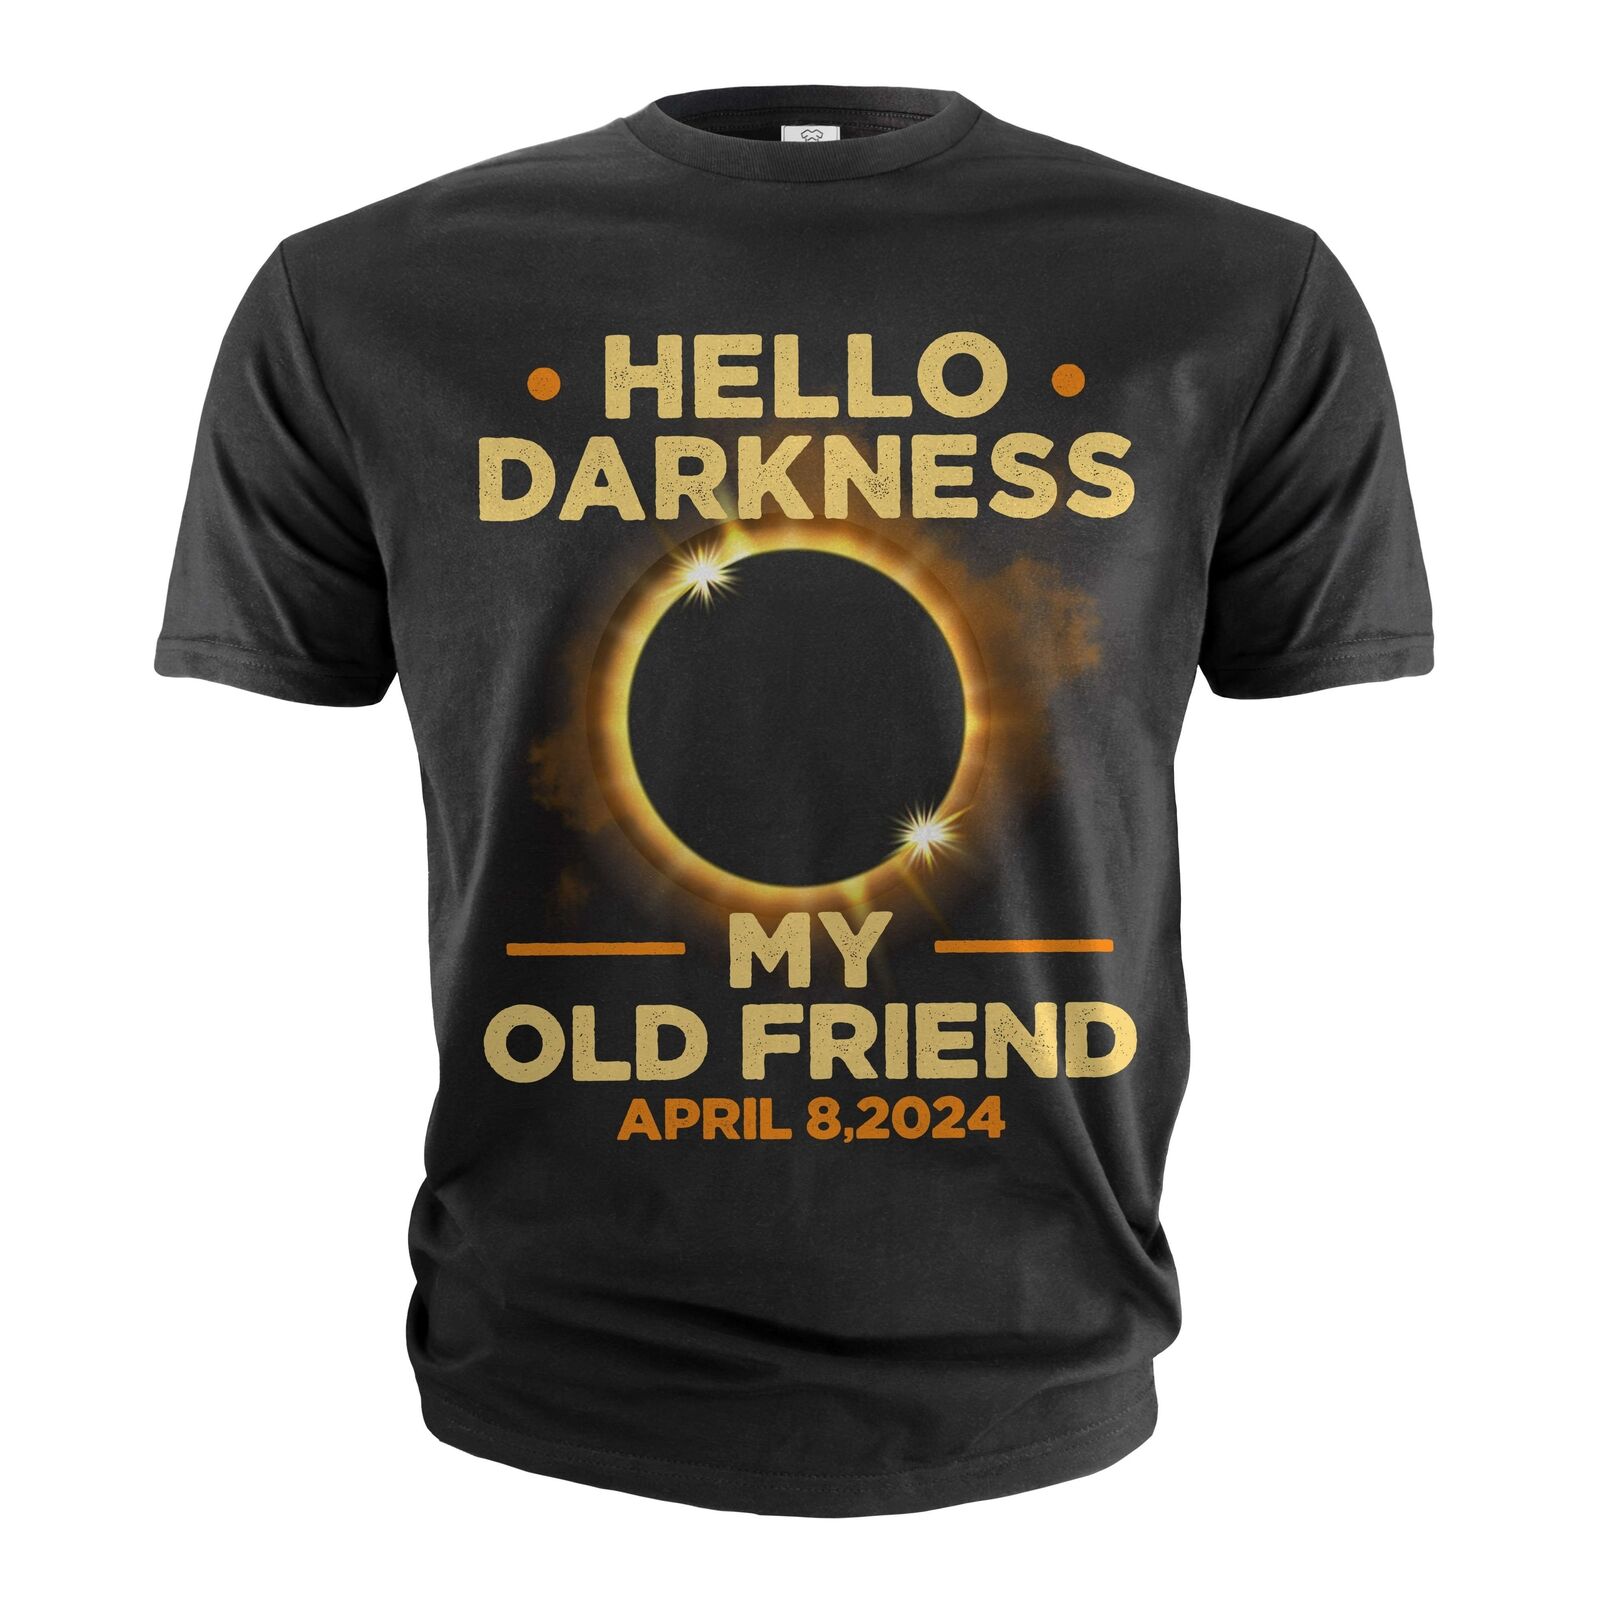 Total solar eclipse of 2024 Tshirt Hello Darkness once Twice in a lifetime shirt